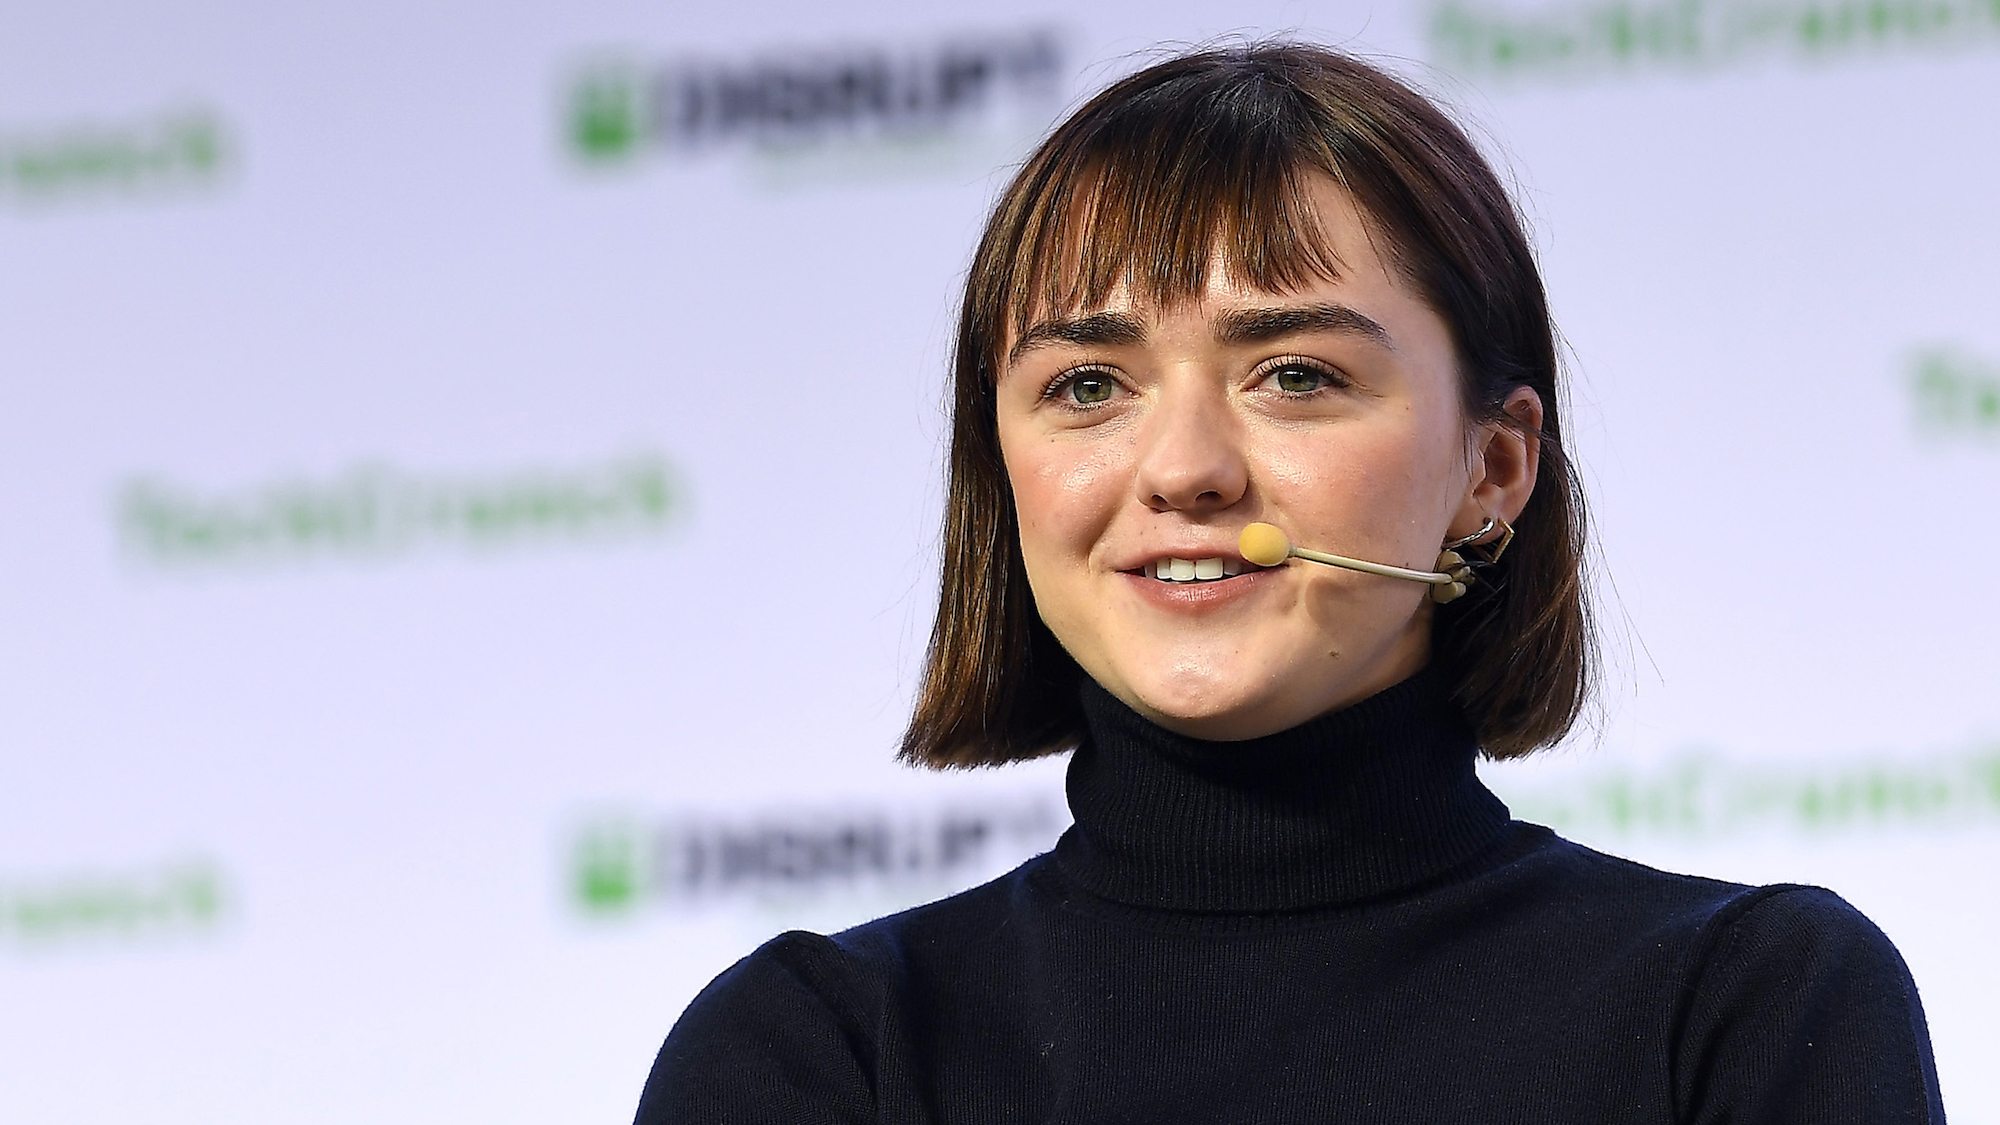 The New Mutants Starring Maisie Williams Gets A New Trailer And